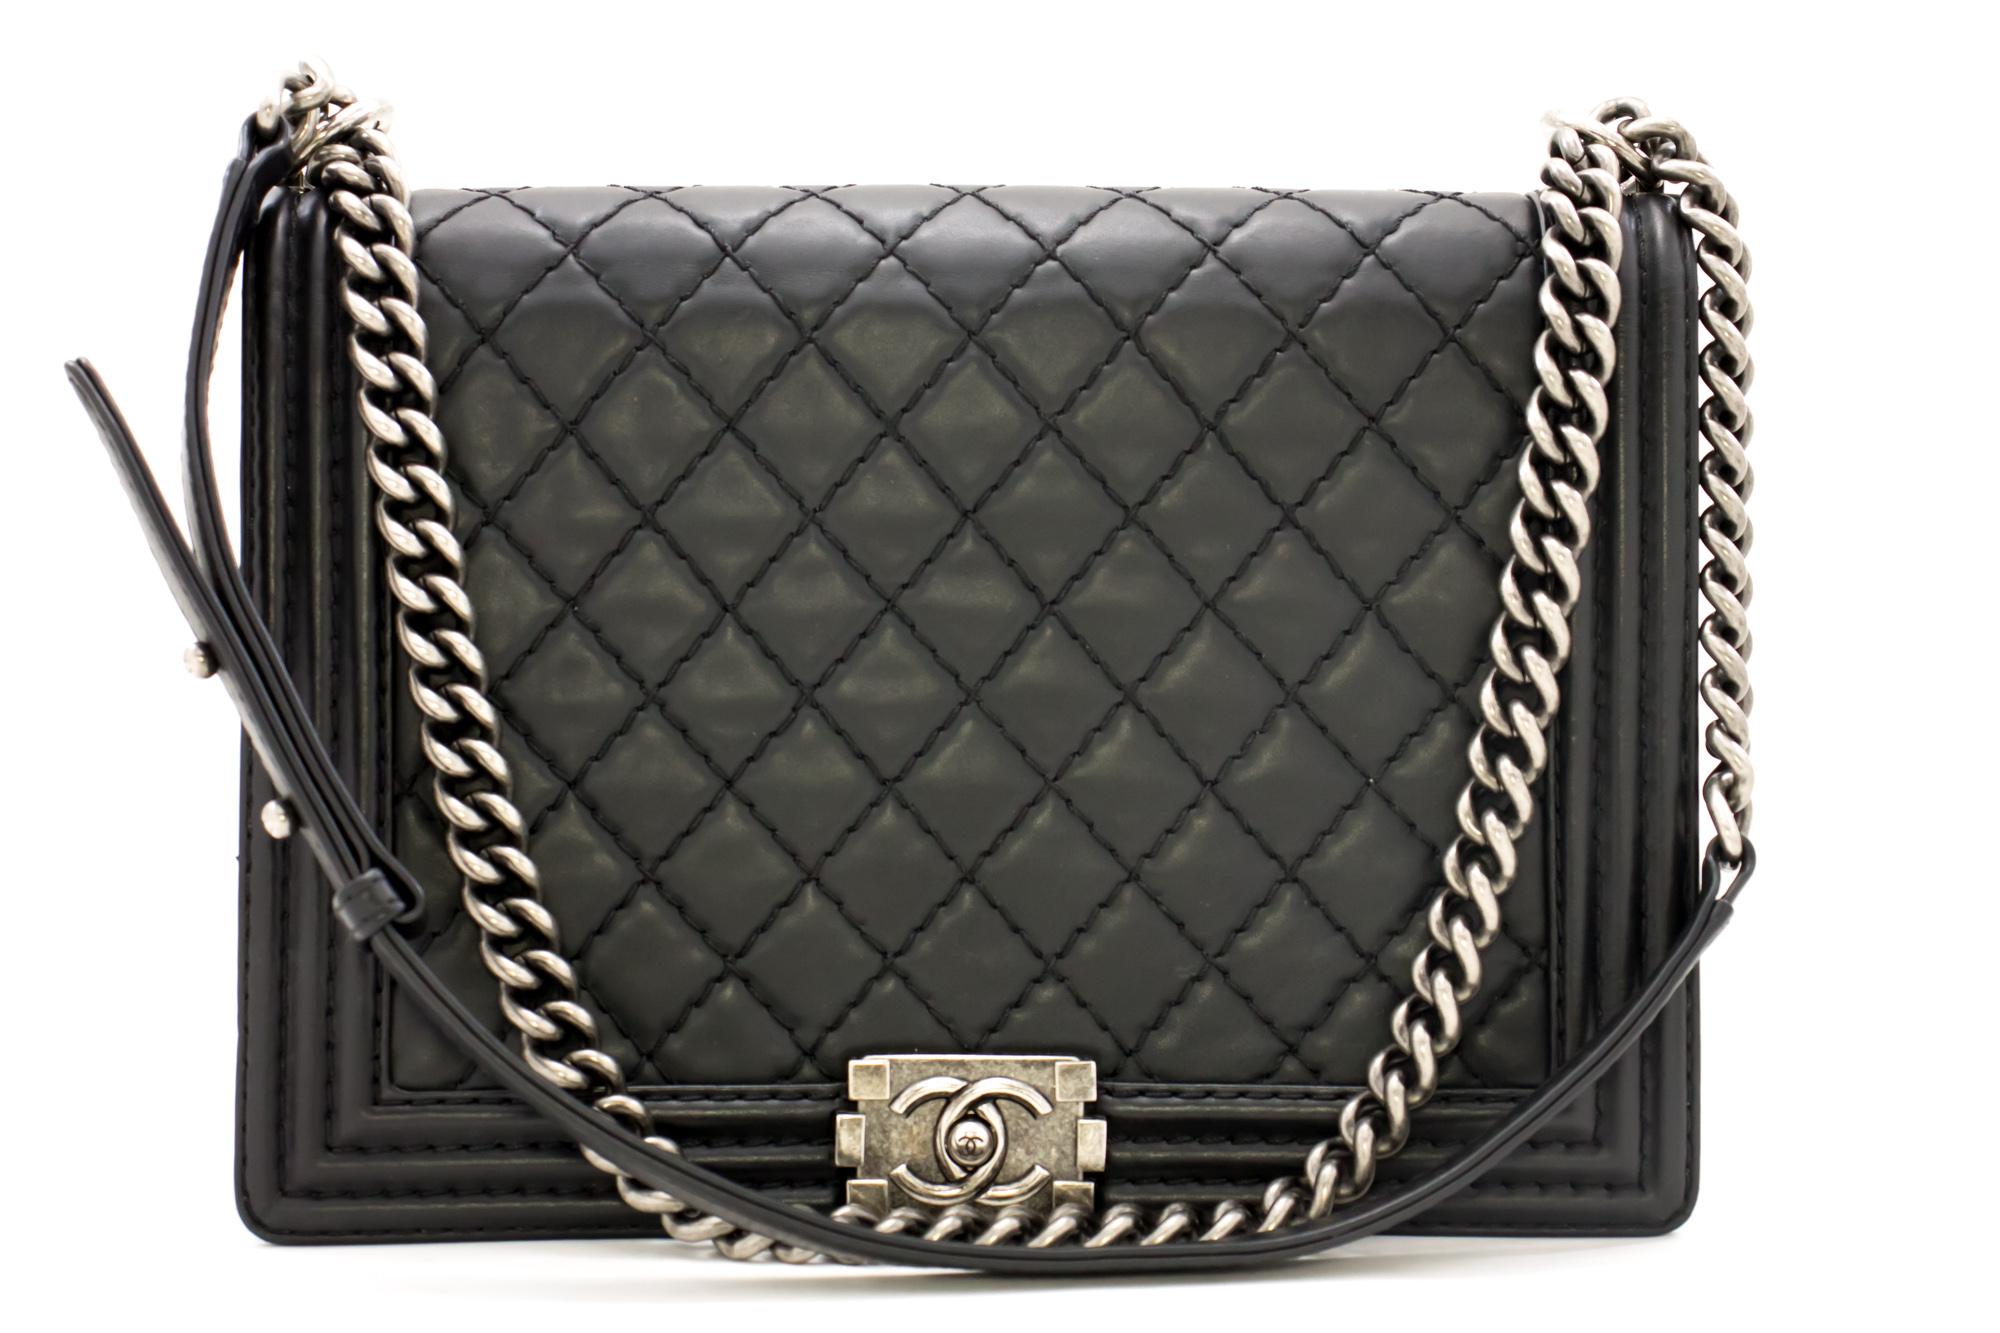 An authentic CHANEL Boy Chain Shoulder Bag Black Quilted Flap Leather Crossbody. The color is Black. The outside material is Leather. The pattern is Solid. This item is Contemporary. The year of manufacture would be 2013.
Conditions &